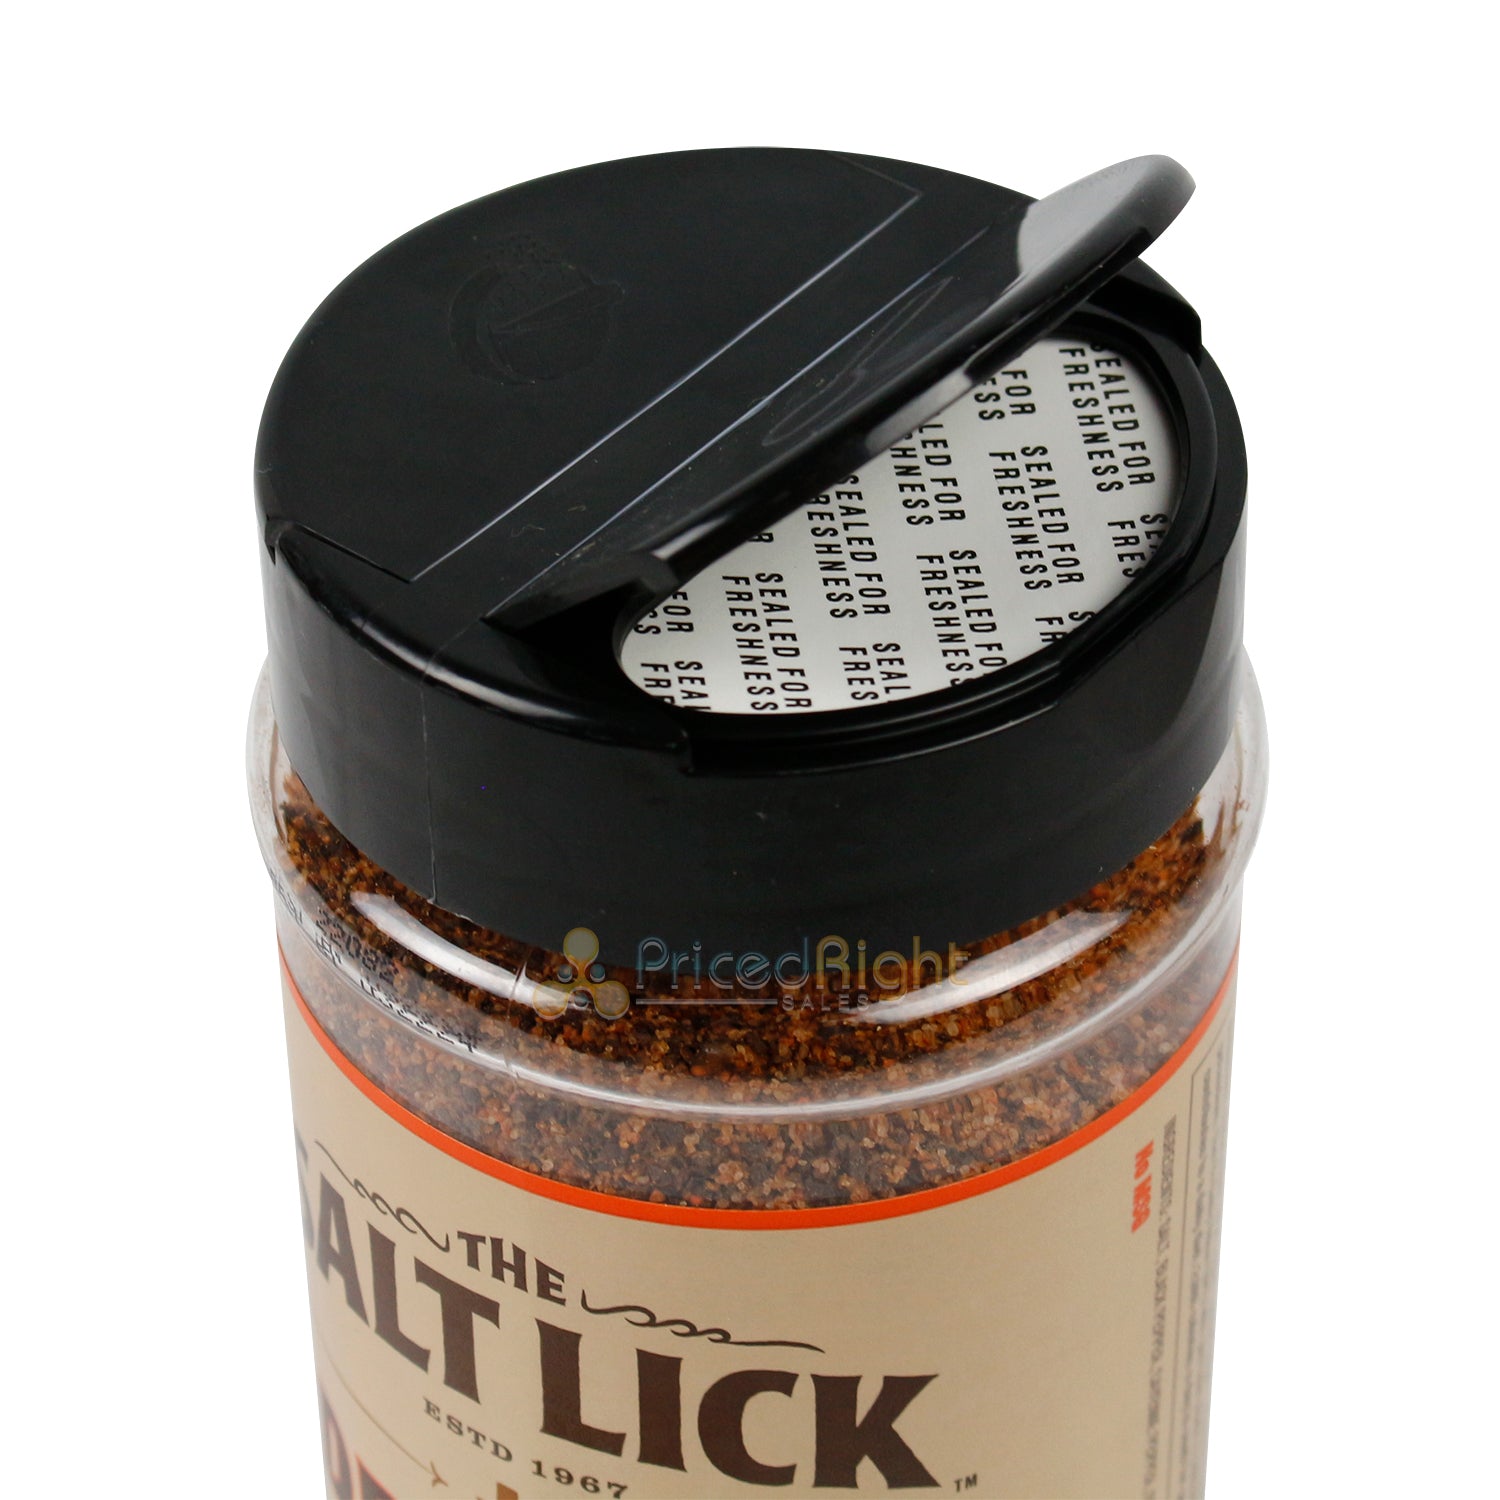 Salt Lick BBQ Garlic Dry Rub For Meat With Cayenne Pepper No Added MSG 3.5oz